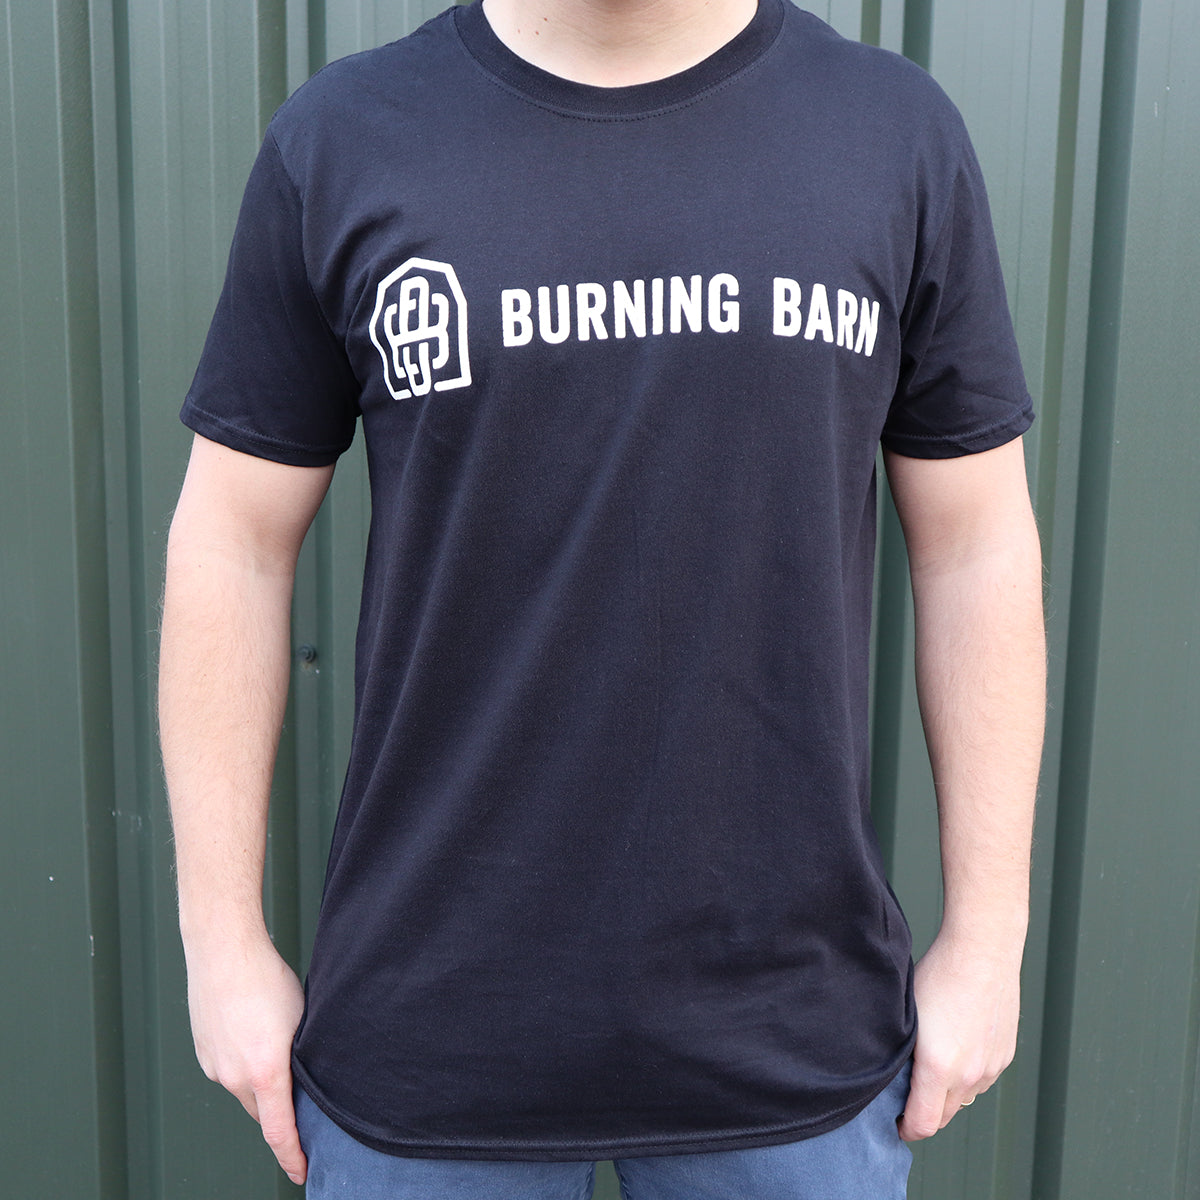 Person wearing a black t-shirt with the Burning Barn logo on it - view of the front